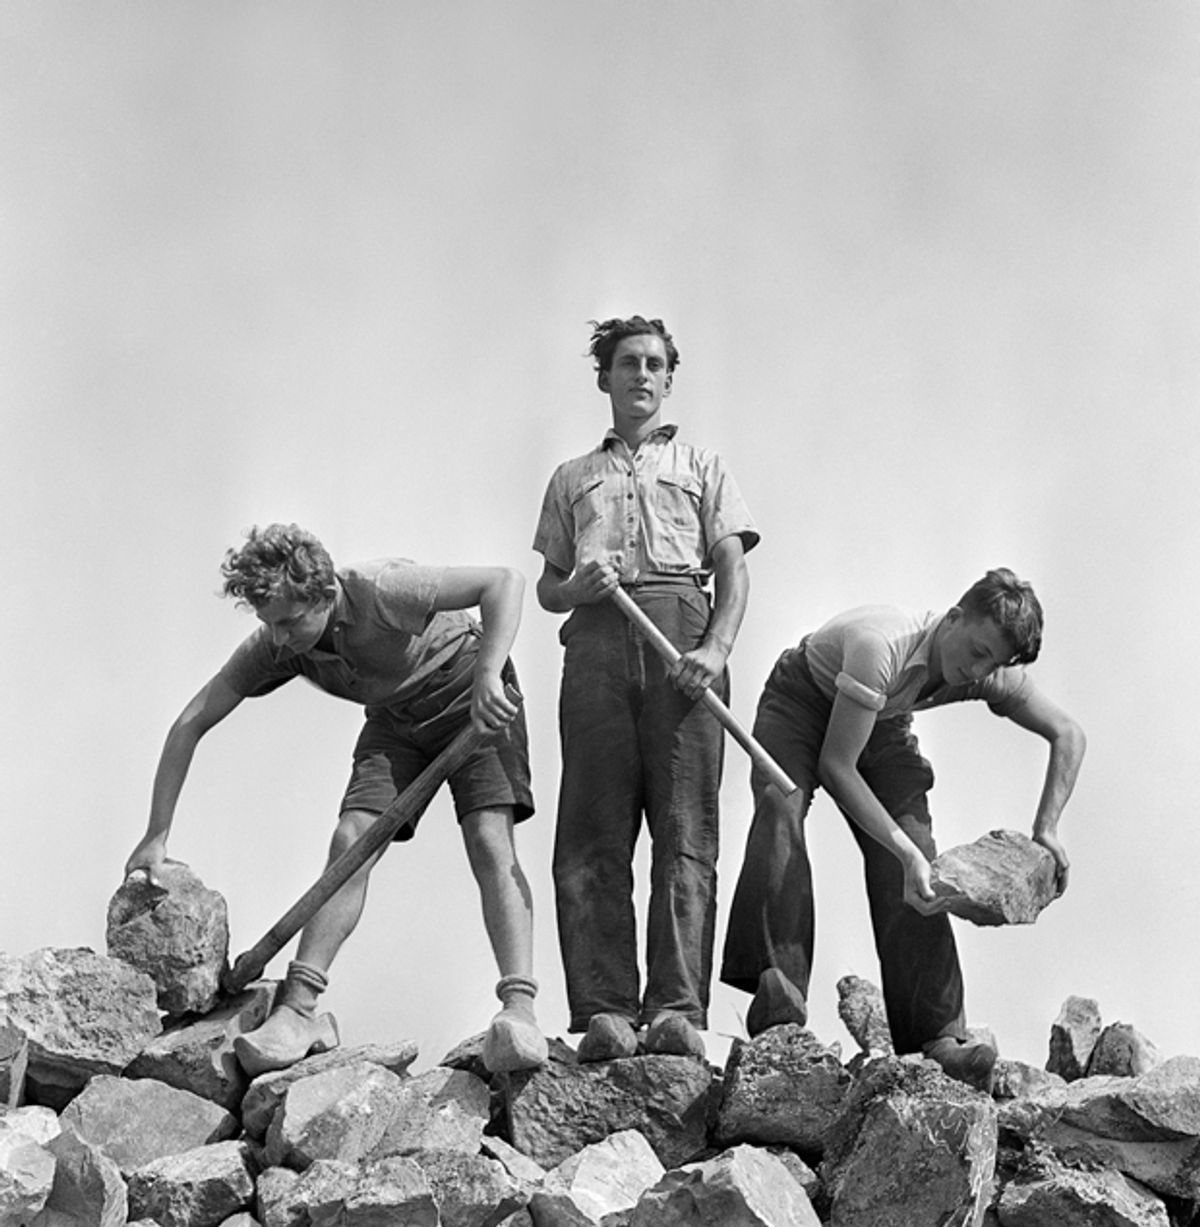 Roman Vishniac. [Ernst Kaufmann, center, and unidentified Zionist youth, wearing clogs while learning construction techniques in a quarry, Werkdorp Nieuwesluis, Wieringermeer, The Netherlands] 1939. © Mara Vishniac Kohn, courtesy International Center of Photography